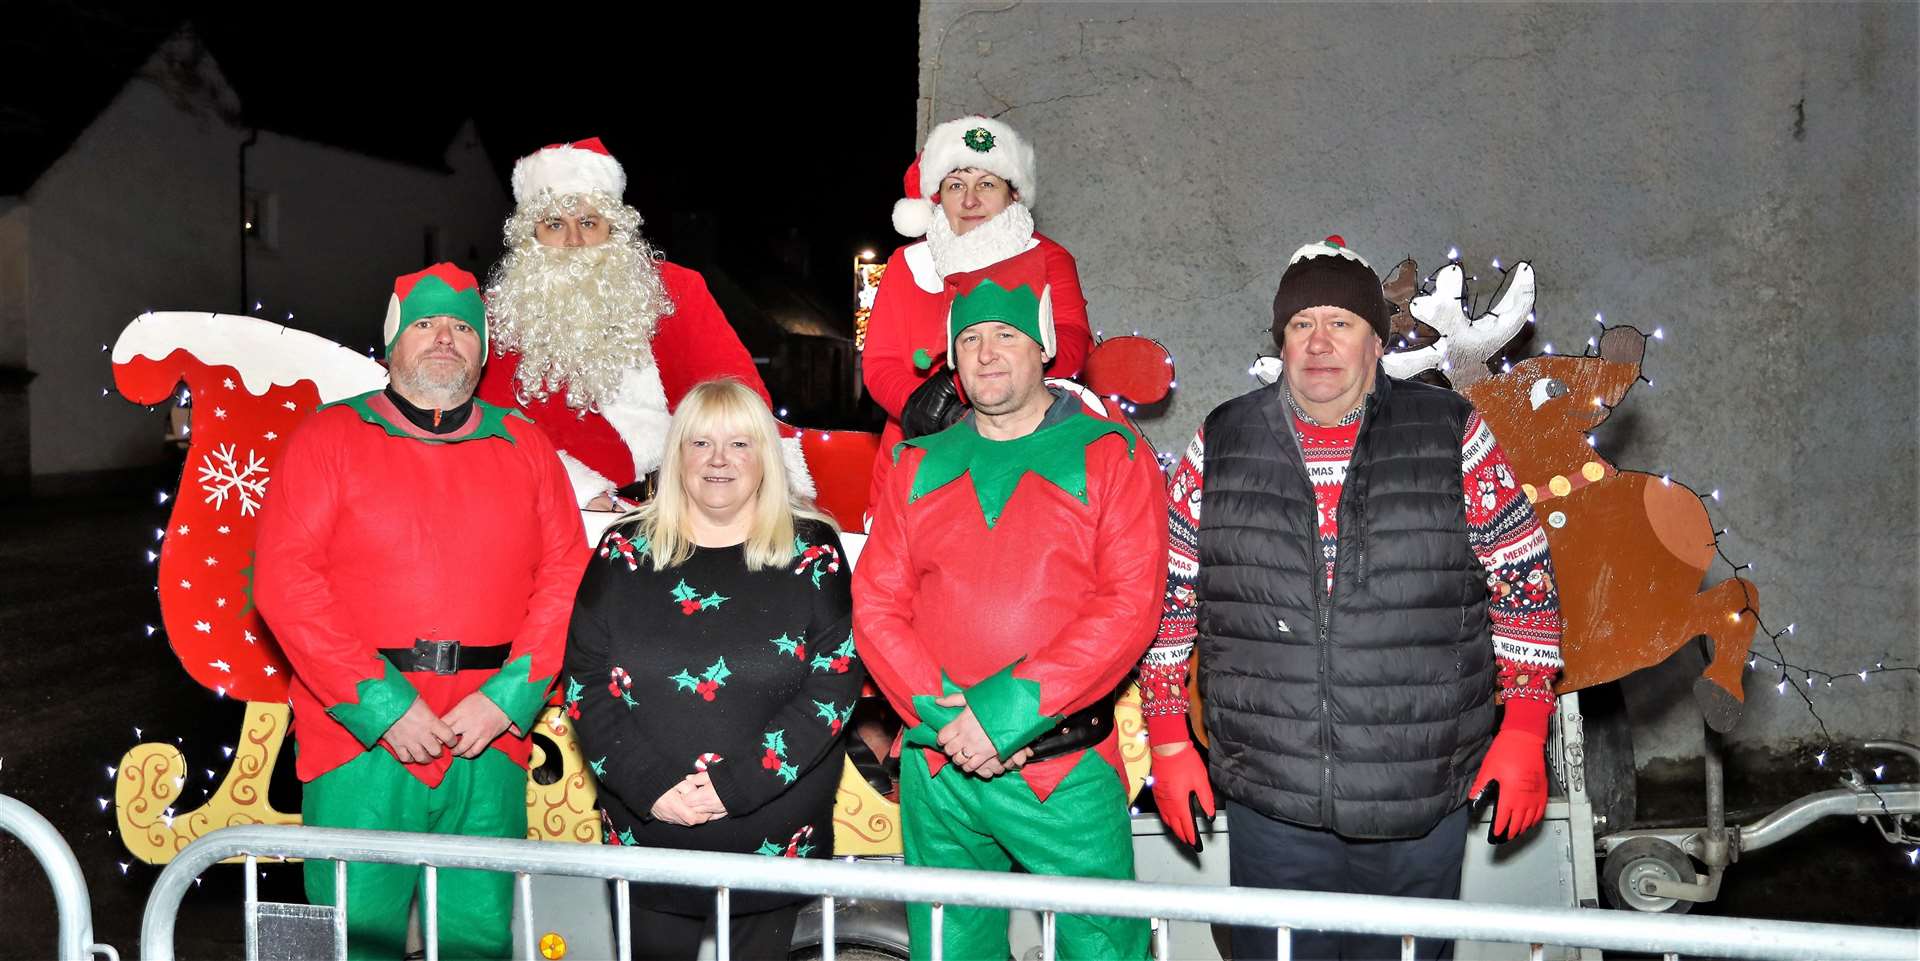 Santa and his helpers. From left, Mark Budge, Alastair Budge, Mandy MacDonald (who donated the sweets along with Martin Munro). Fiona Budge, Iain MacKenzie, and Alec Budge. Picture: James Gunn